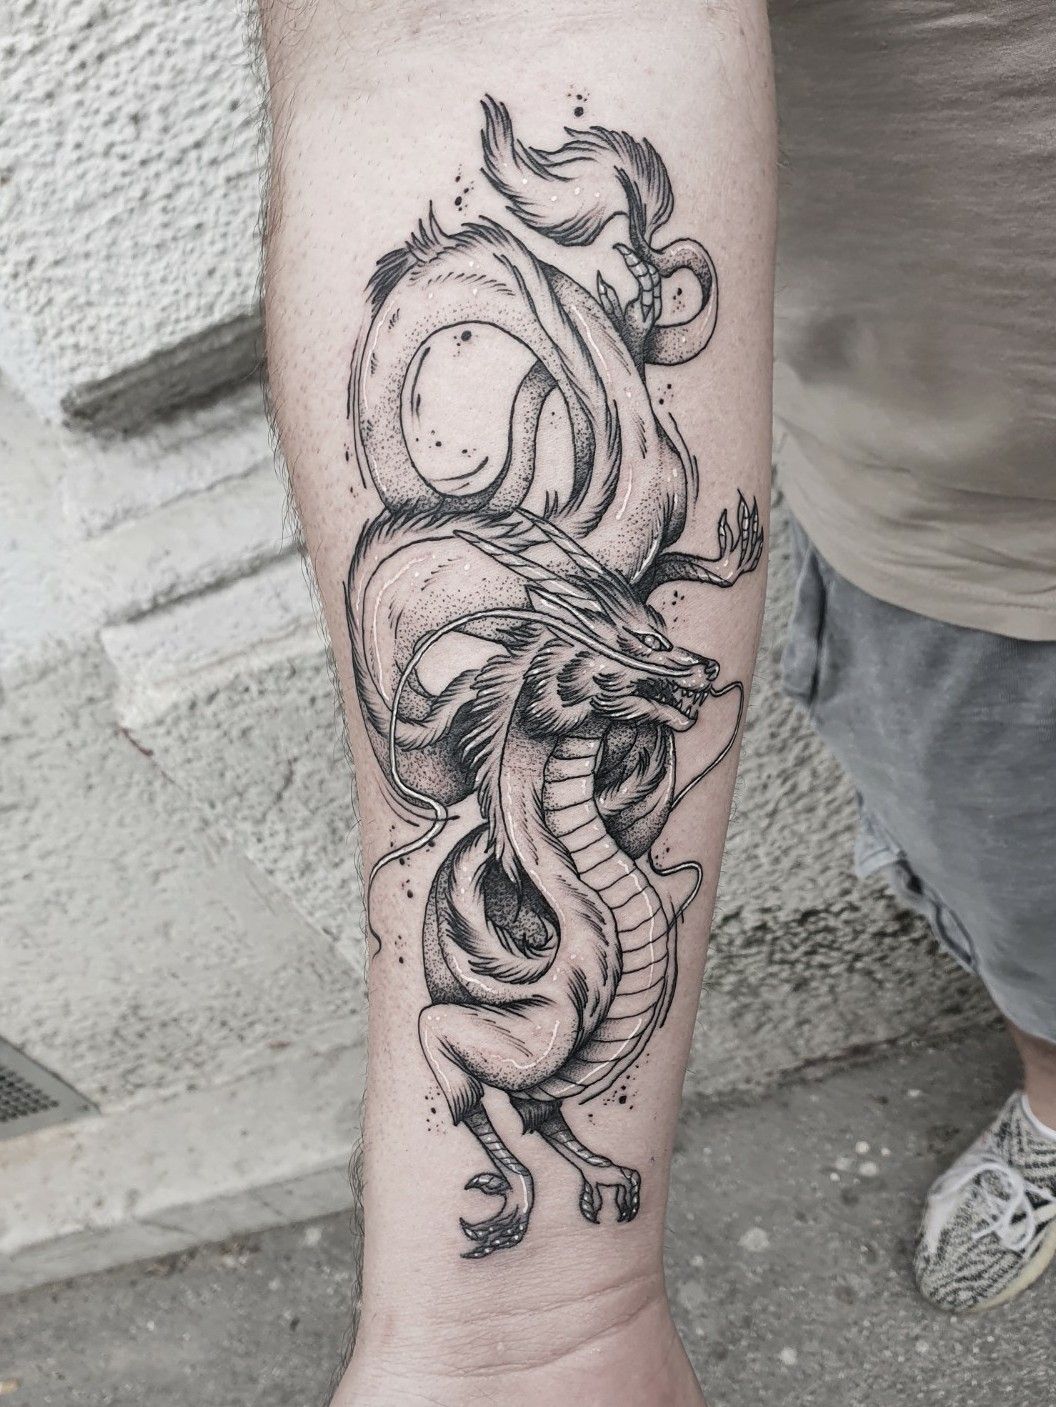 English Cousins on Instagram: Hungarian horntail | Body art tattoos, Tattoos,  Tattoo you